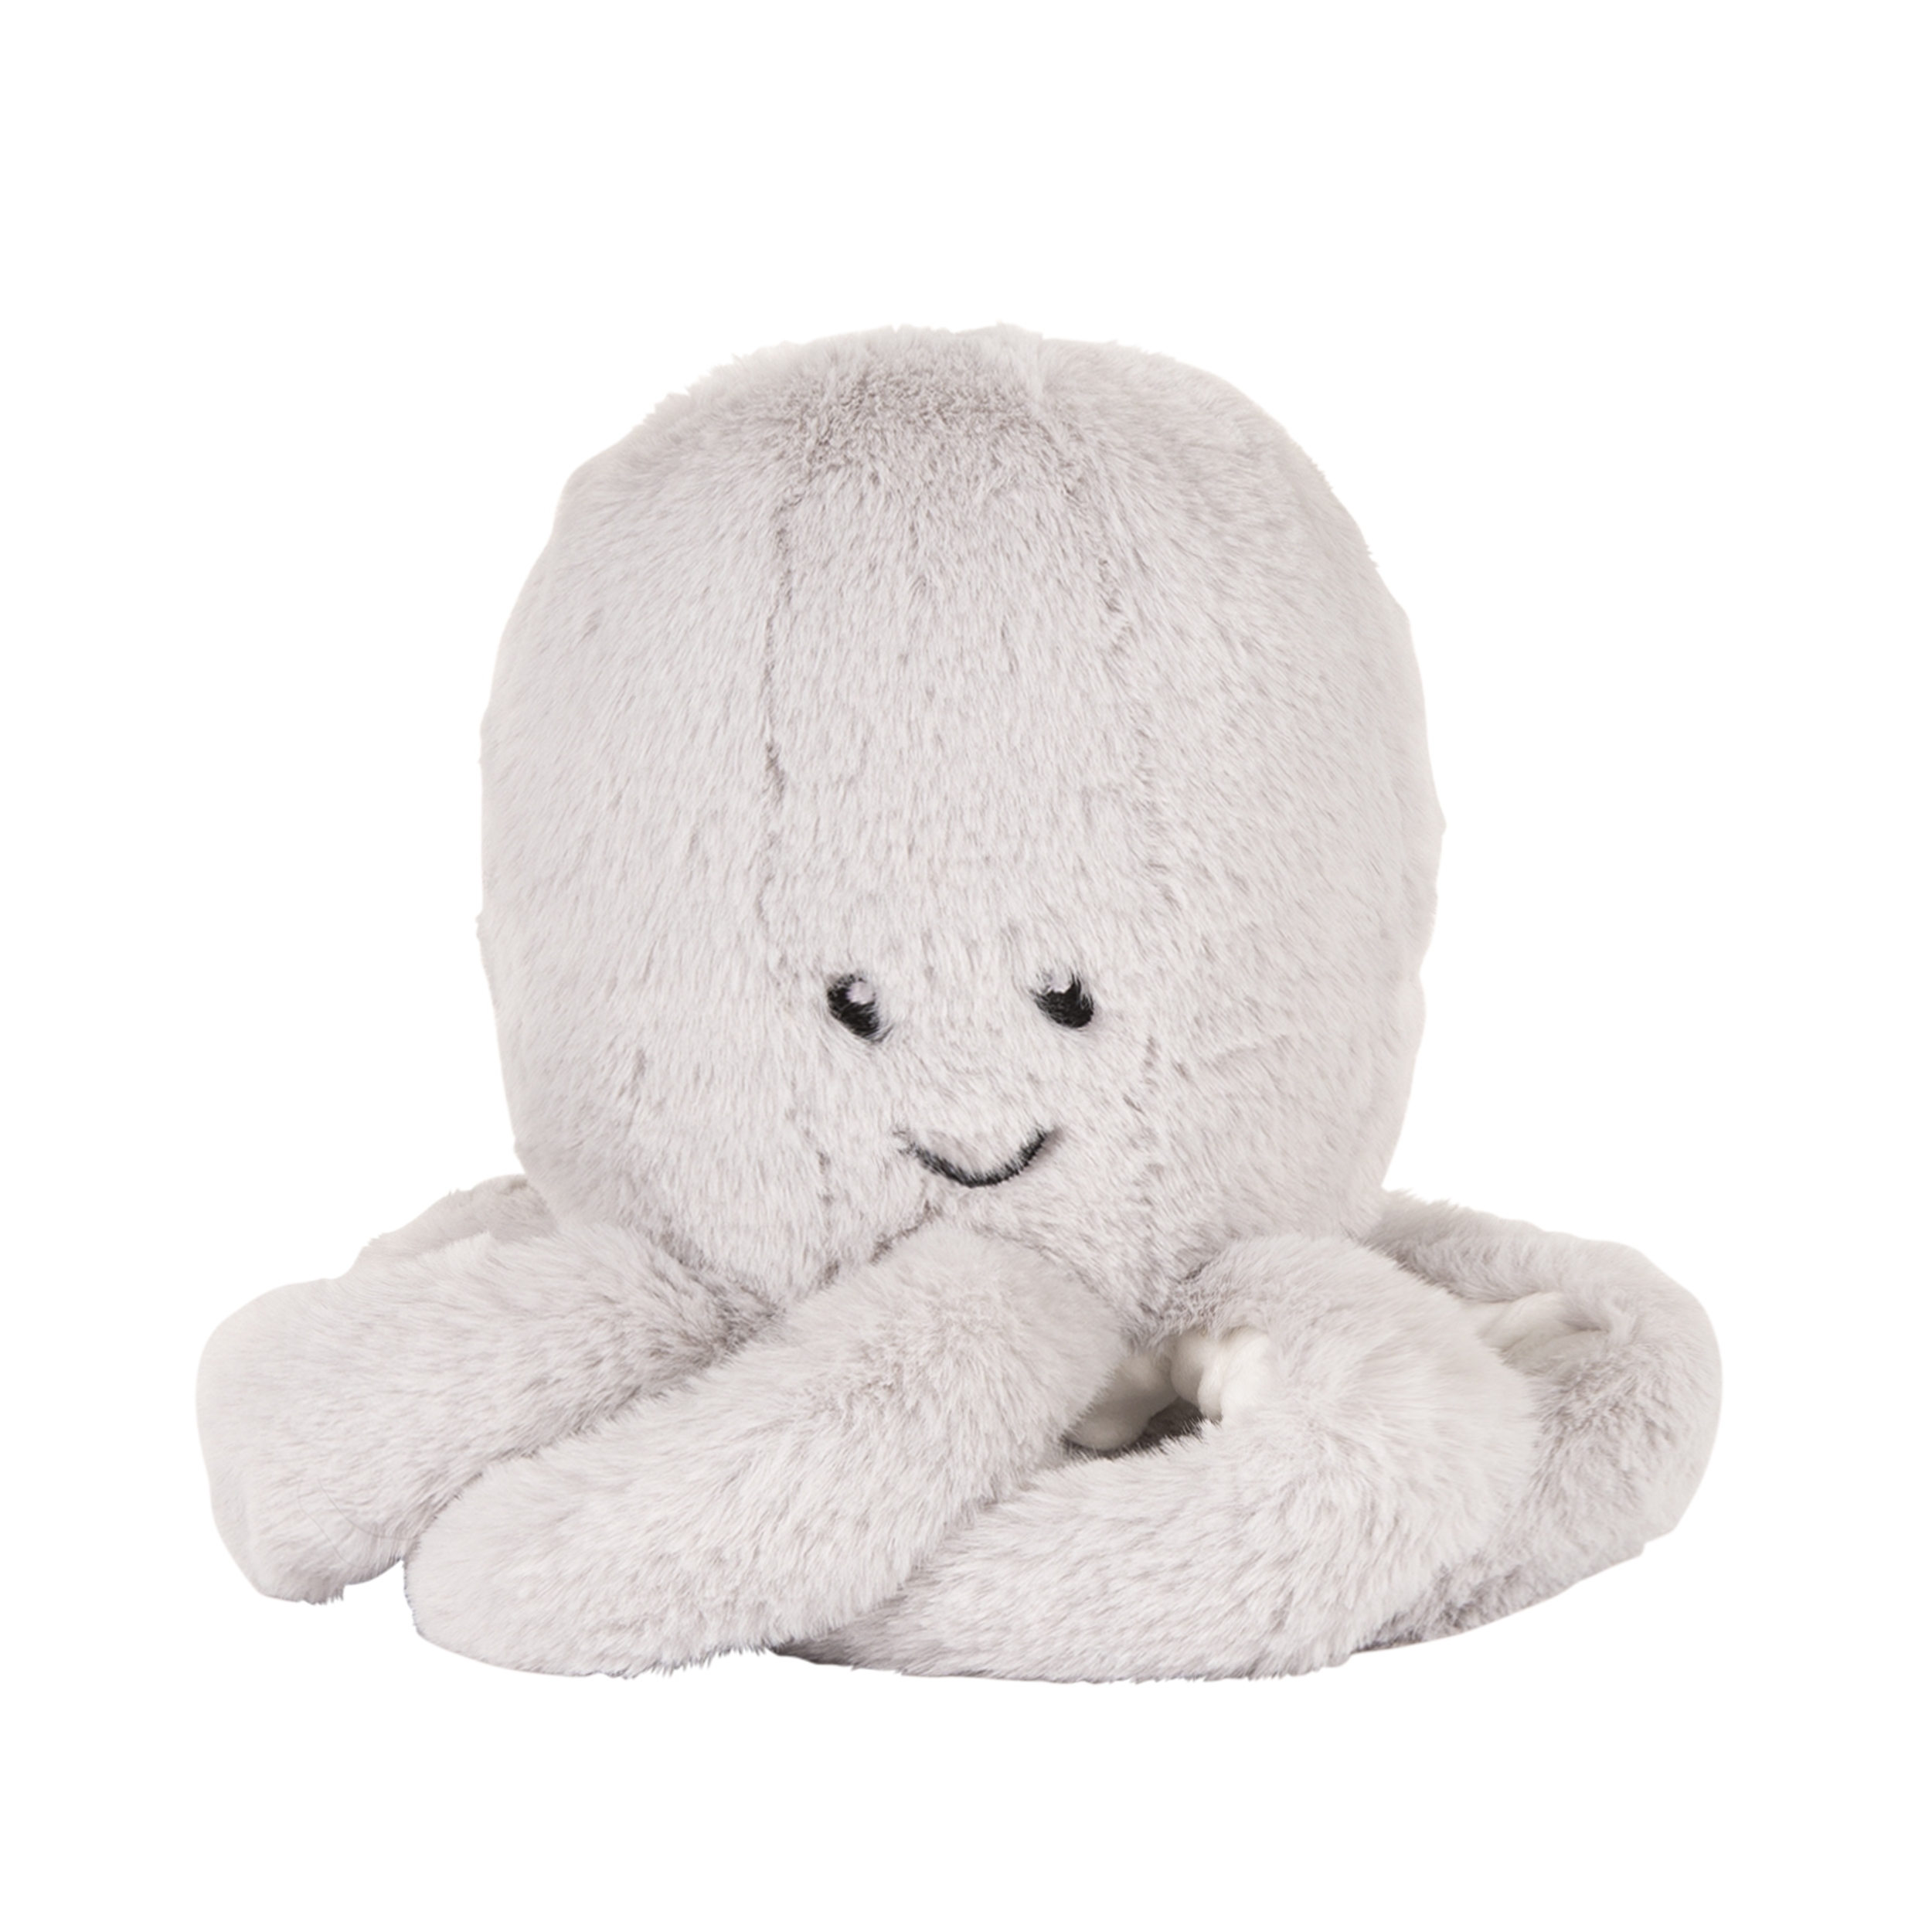 Flow Heartbeat Soft Toy Olly the Octopus - 24 cm.